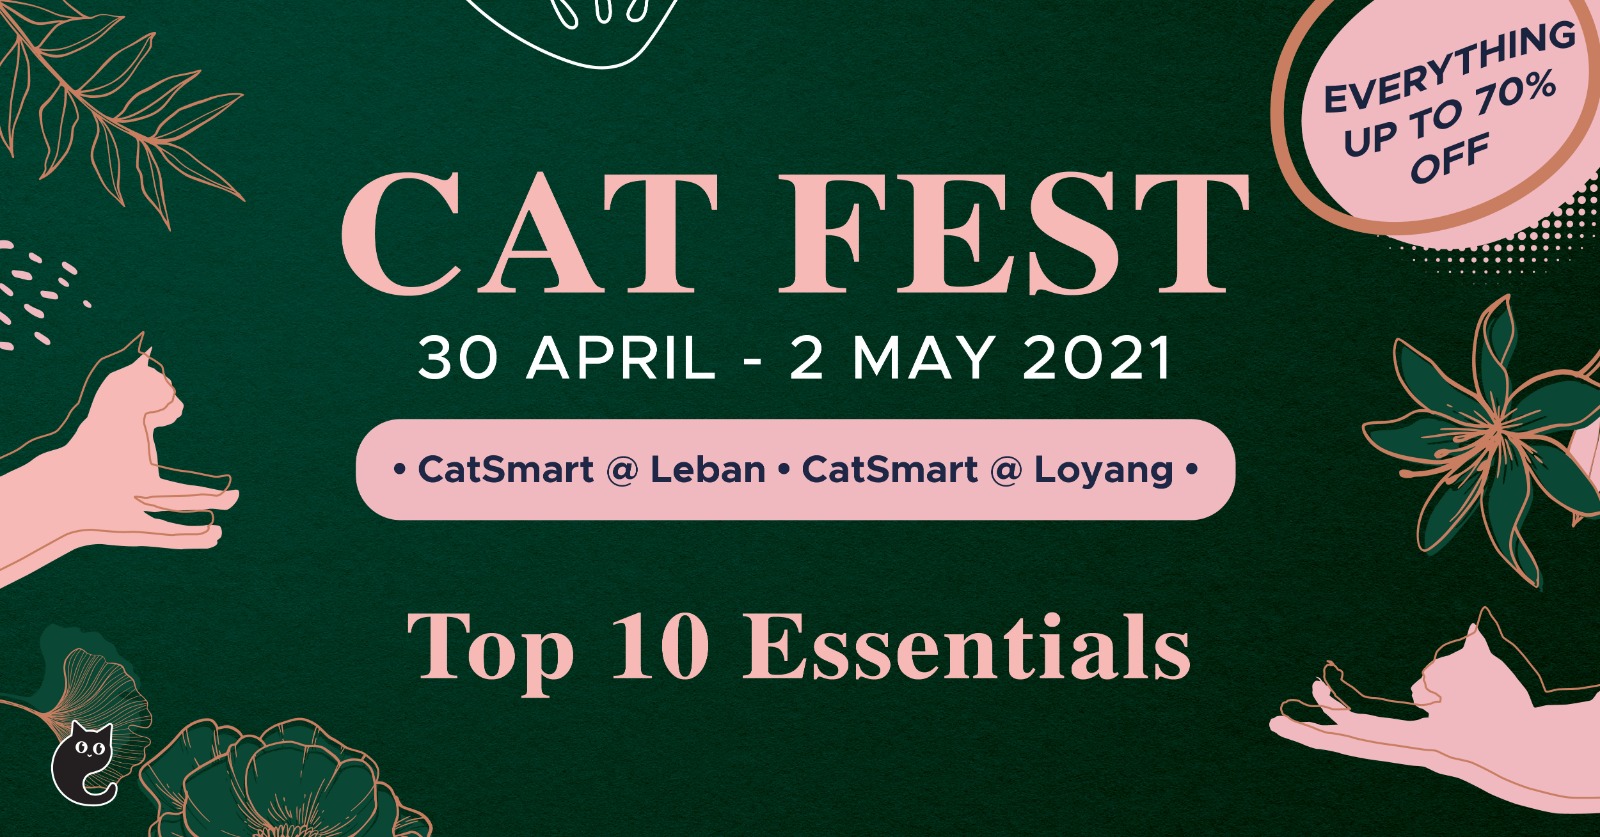 Get Your Hands On These Top 10 Cat Essentials At Cat Fest 2021